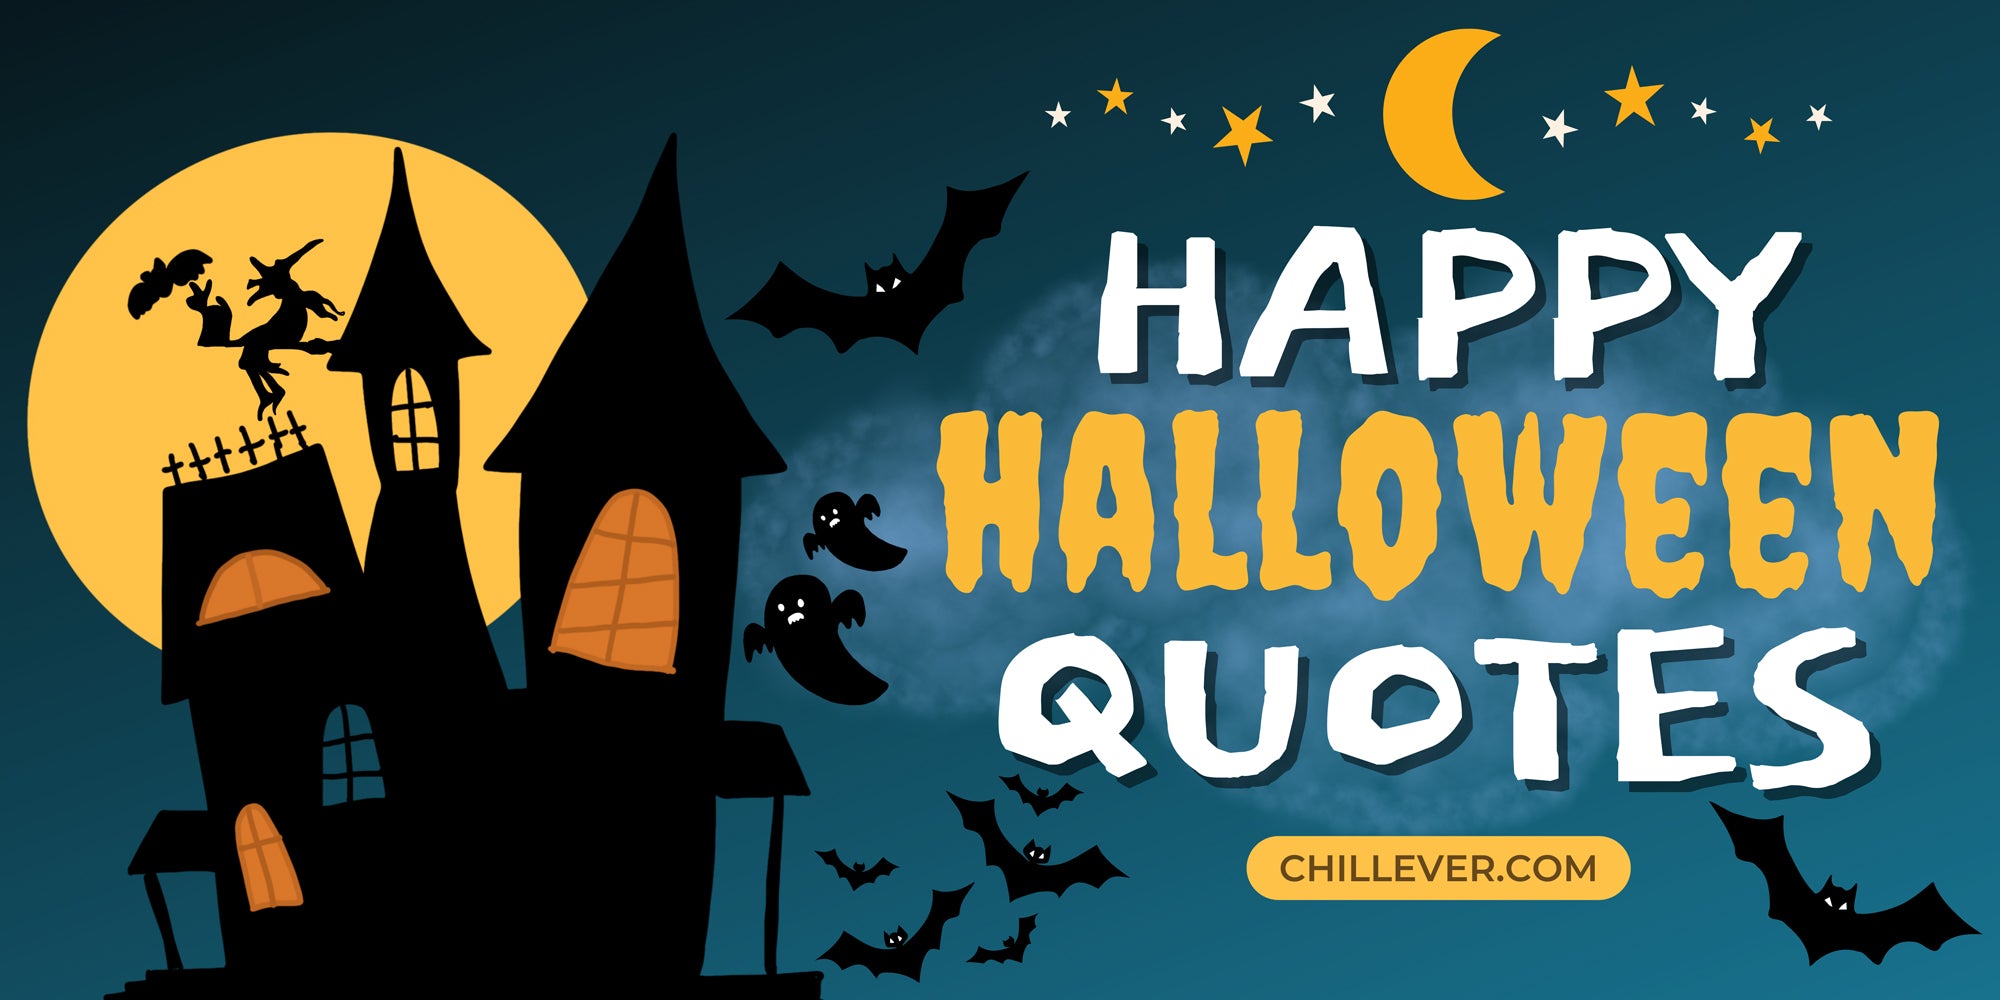 200+ Spookcular Halloween Quotes and Sayings to Boo Your Loved Ones